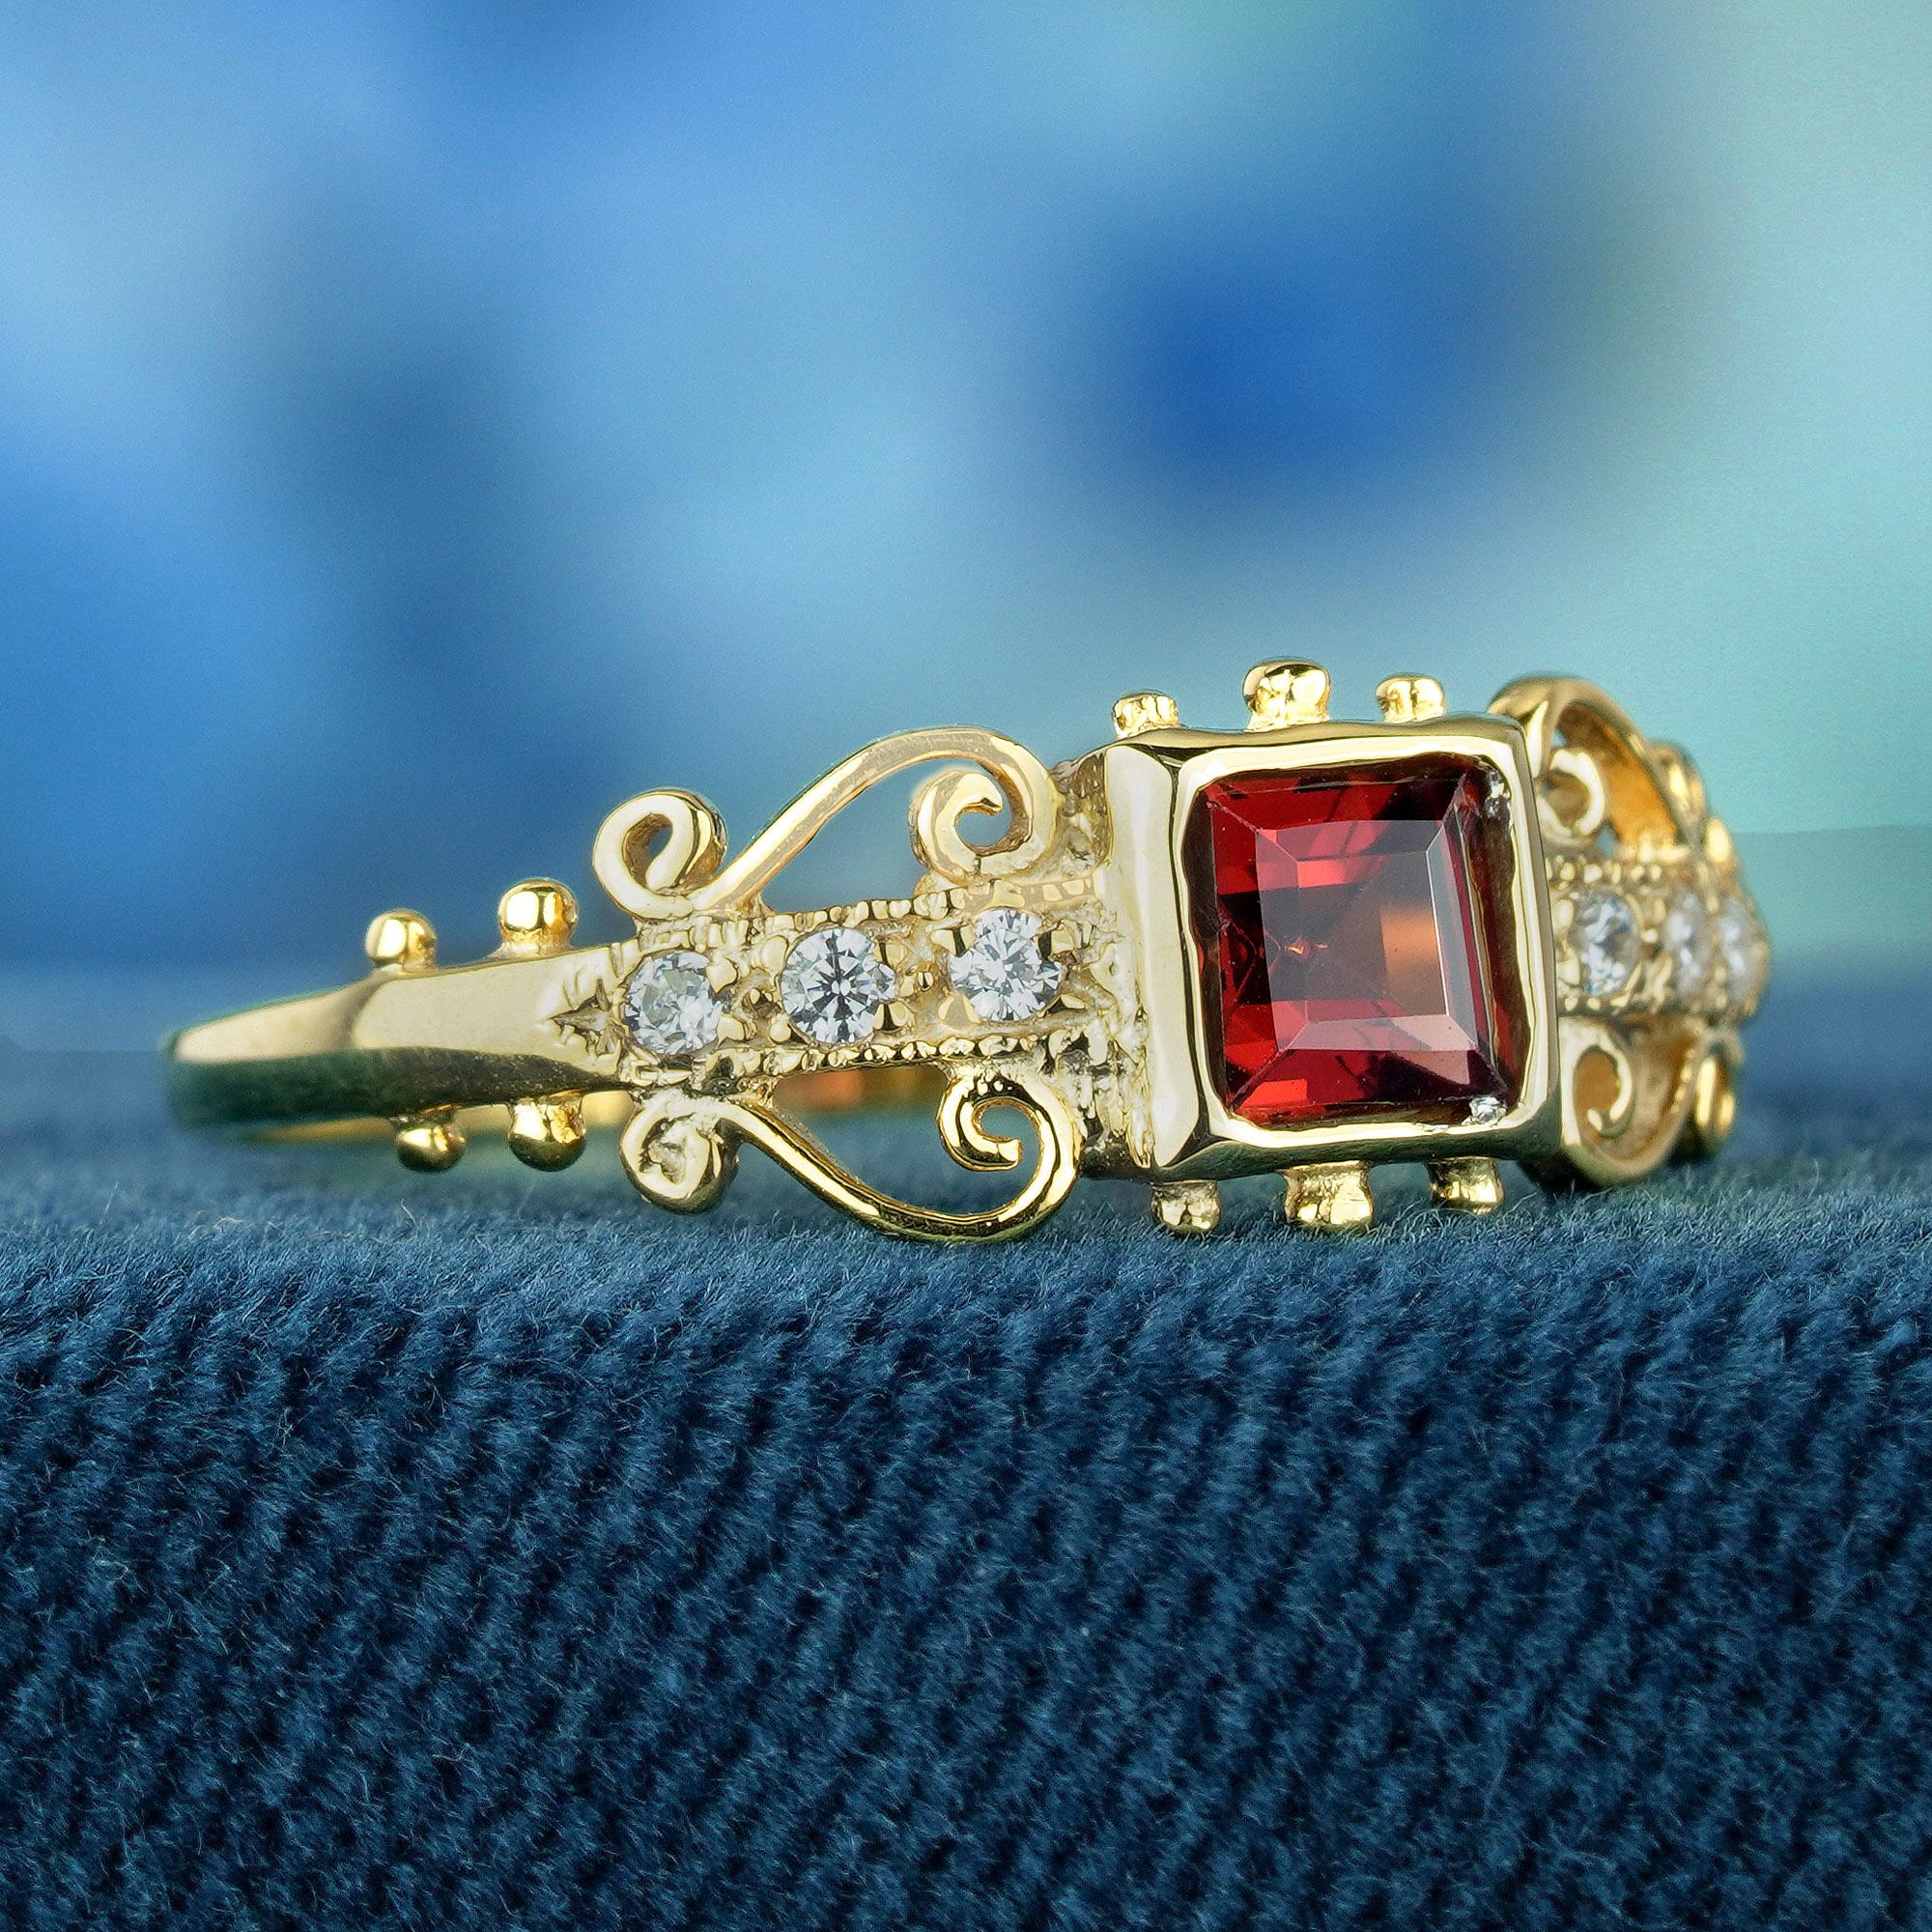 This vintage-inspired ring exudes elegance, featuring intricate scrollwork details that elevate its beauty. Embellished with a solitaire deep red, square-cut garnet stone nestled in a yellow gold band adorned with pave round diamonds, it commands